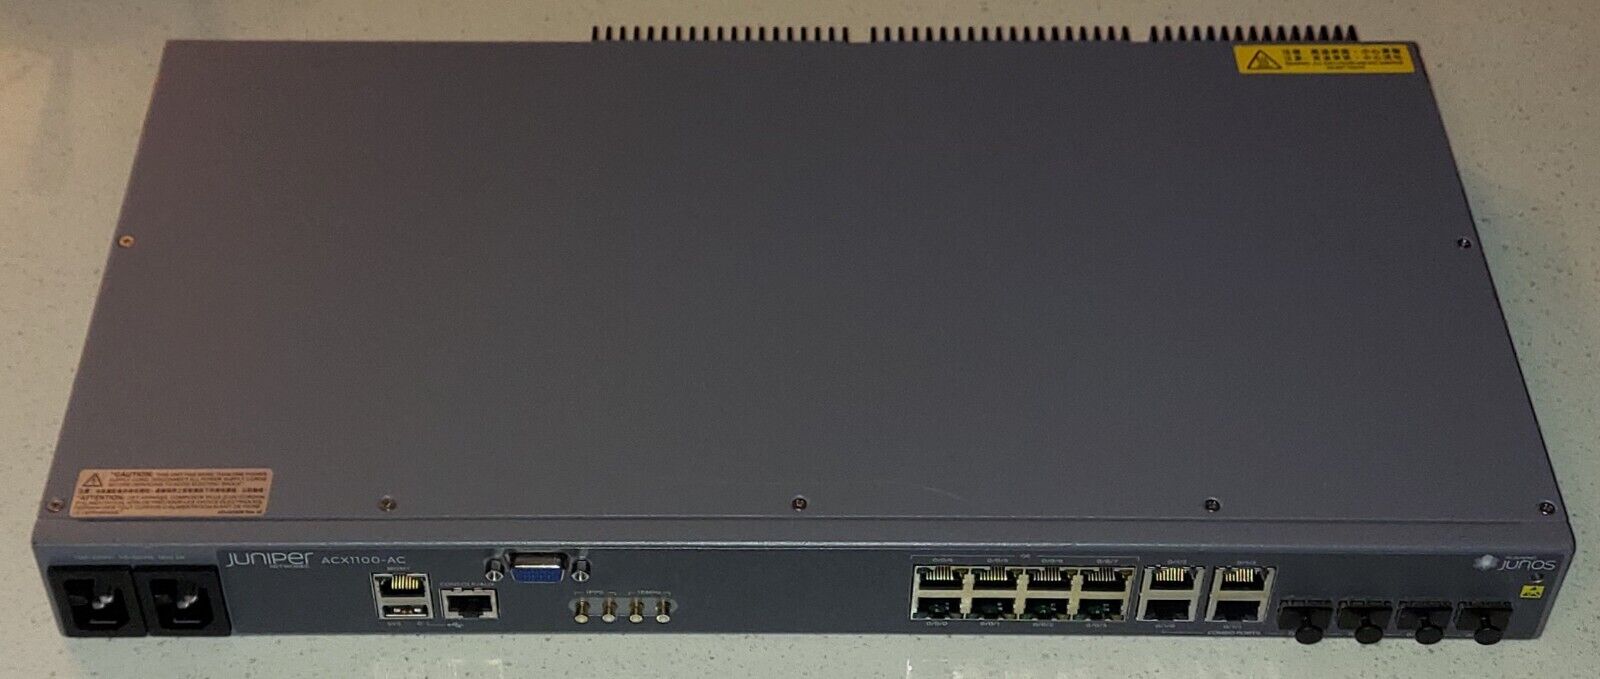 MINT CONDITION JUNIPER NETWORKS ACX1100-AC UNIVERSAL METRO ROUTER 12 1GBE PORTS